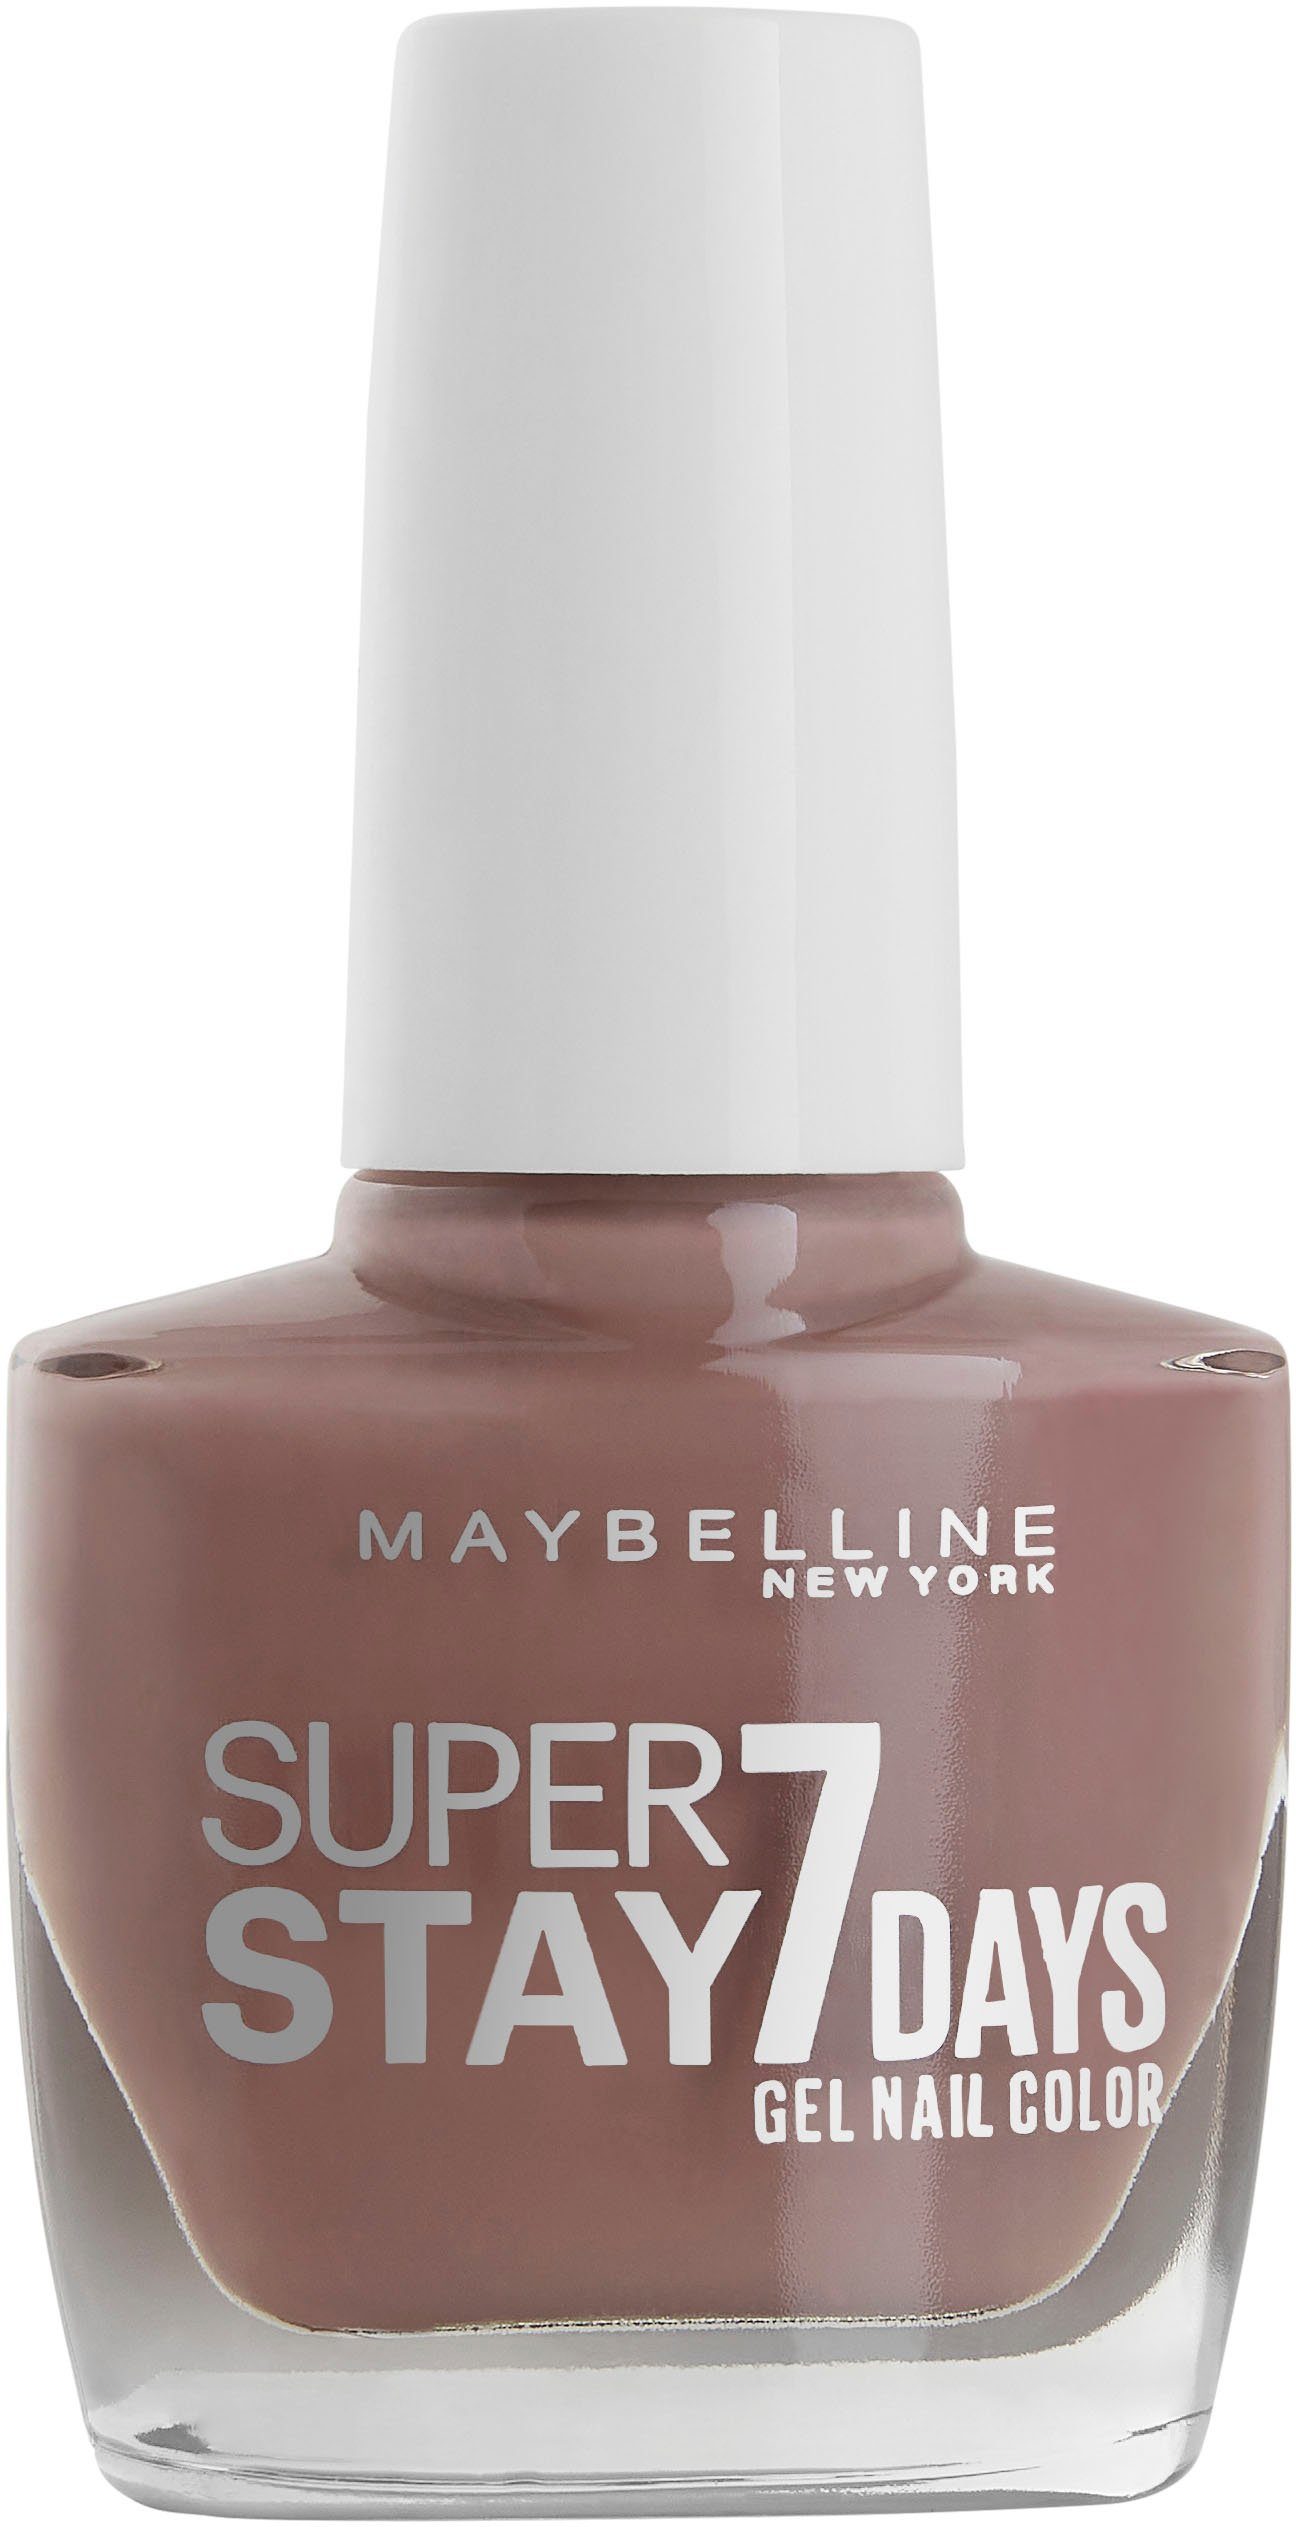 Days 930 MAYBELLINE All NEW Superstay Bare Nagellack YORK 7 Nr. it